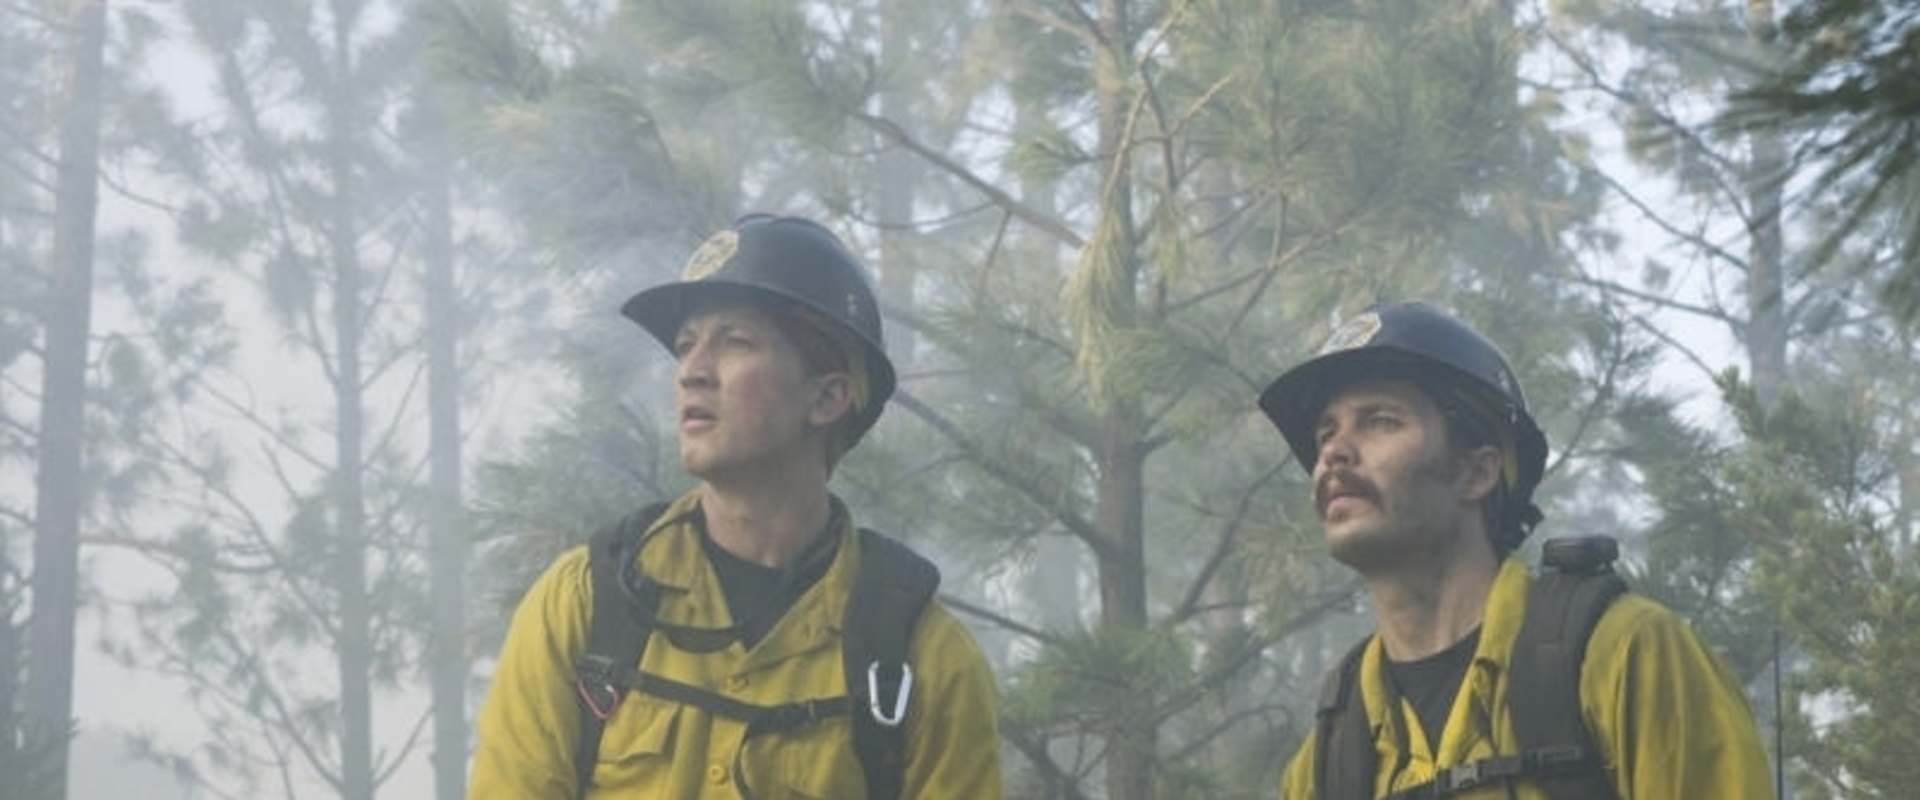 only the brave movie 2017 amazon